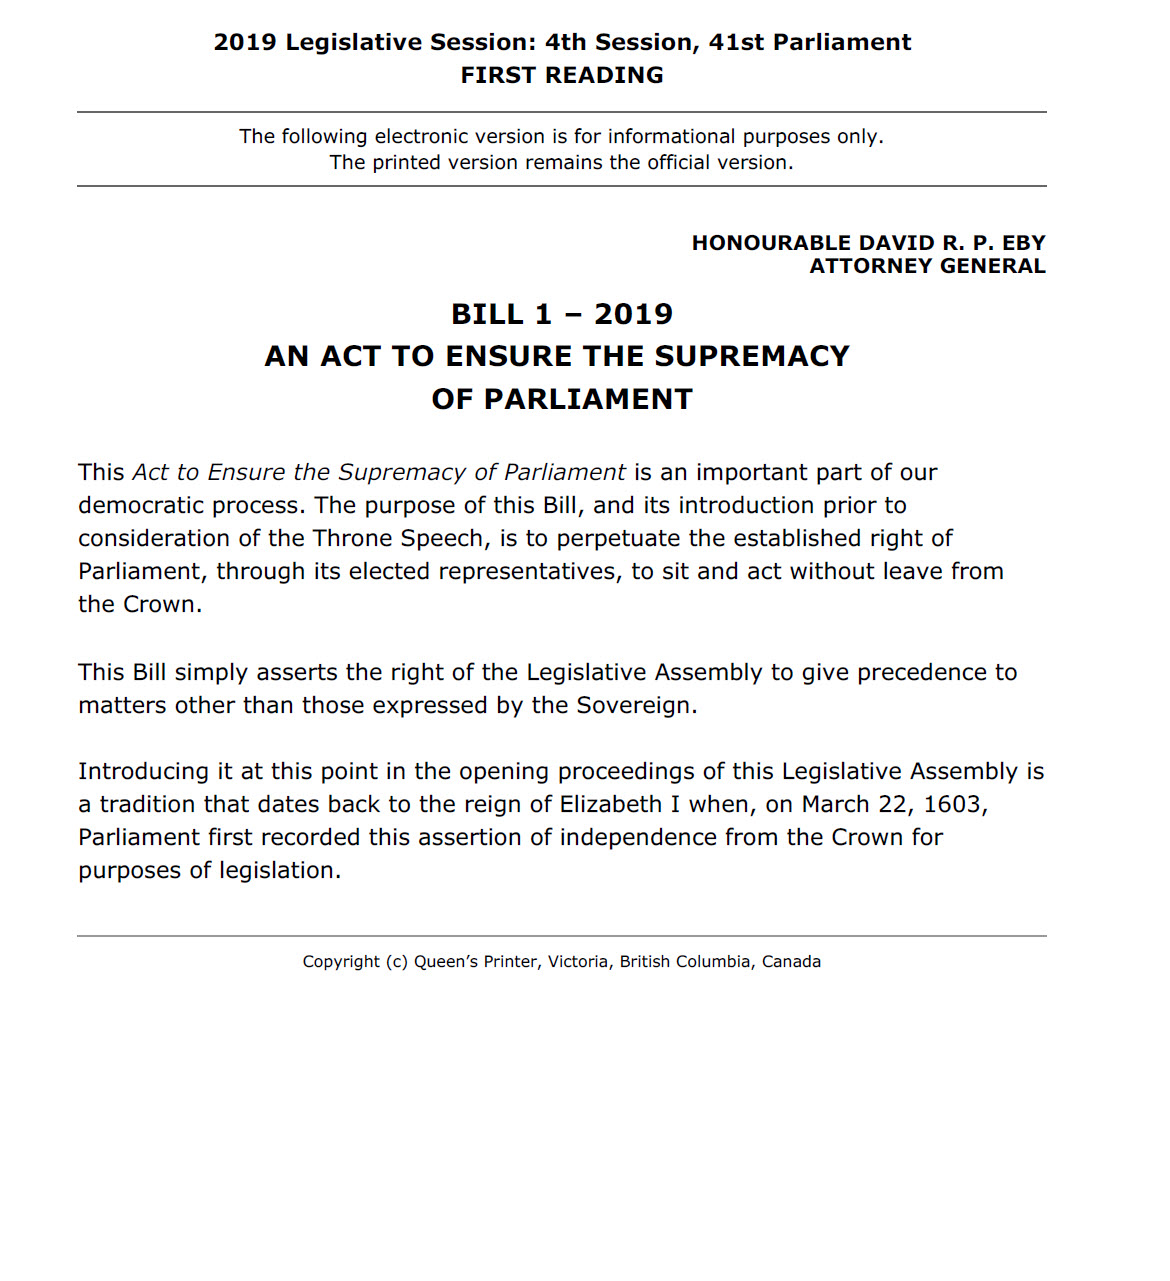 Sample Bill page - Bill 1 - Act to Ensure the Supremacy of Parliament